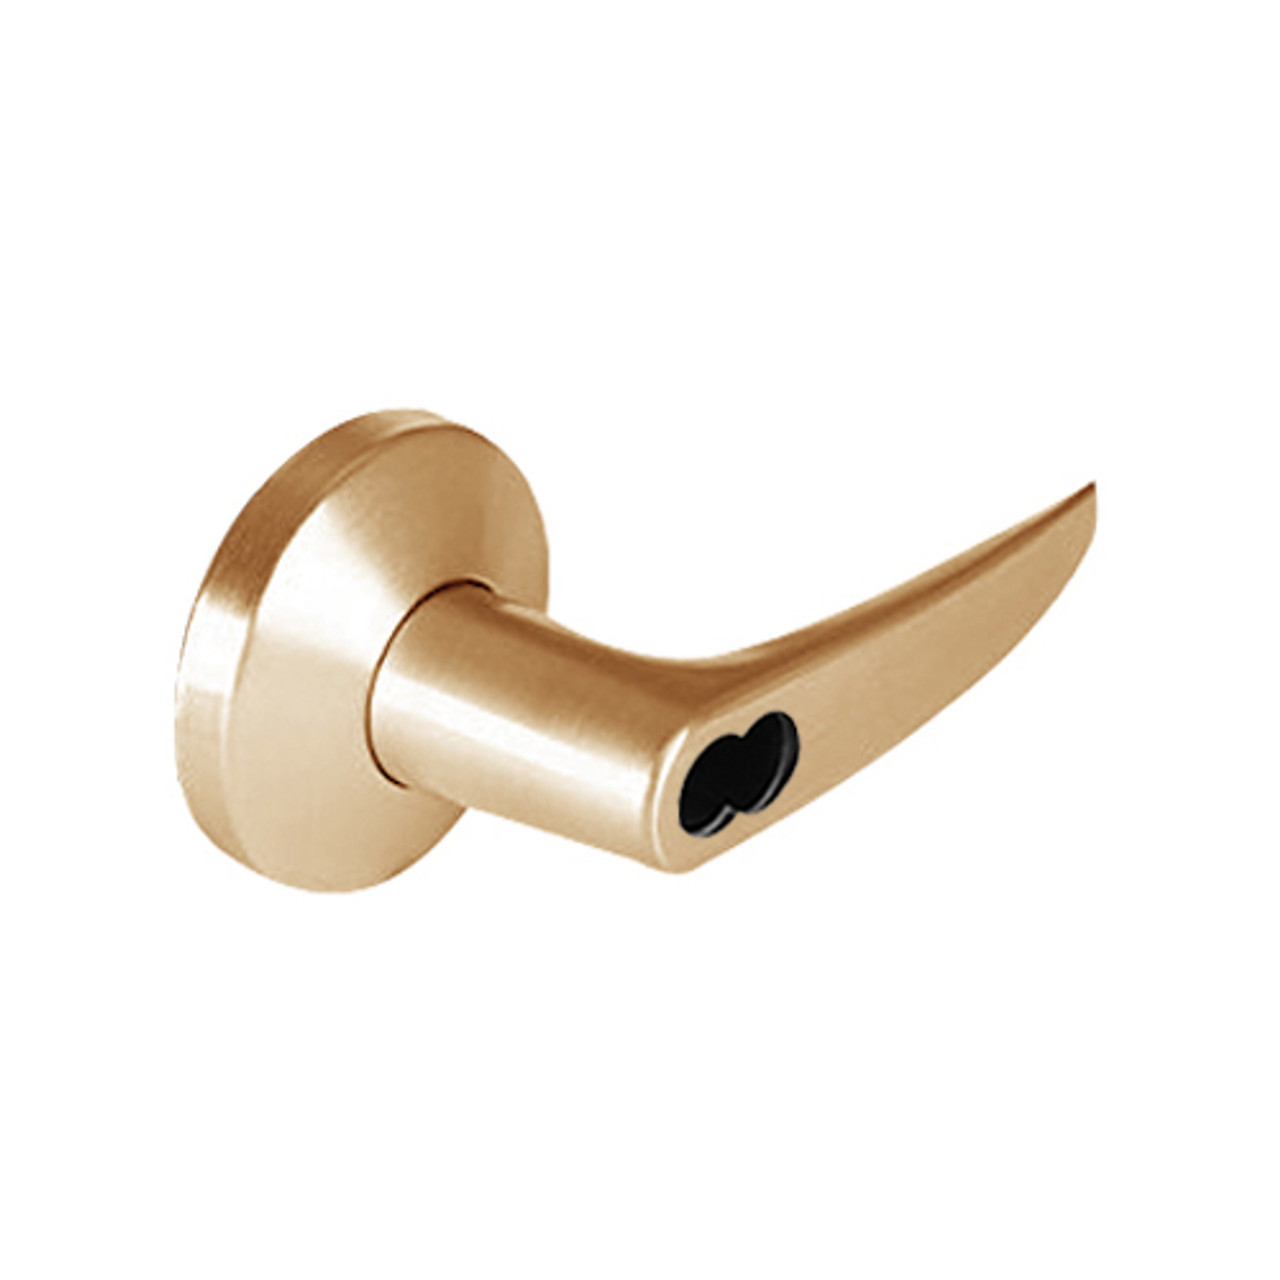 9K37RD16KSTK612LM Best 9K Series Special Function Cylindrical Lever Locks with Curved without Return Lever Design Accept 7 Pin Best Core in Satin Bronze